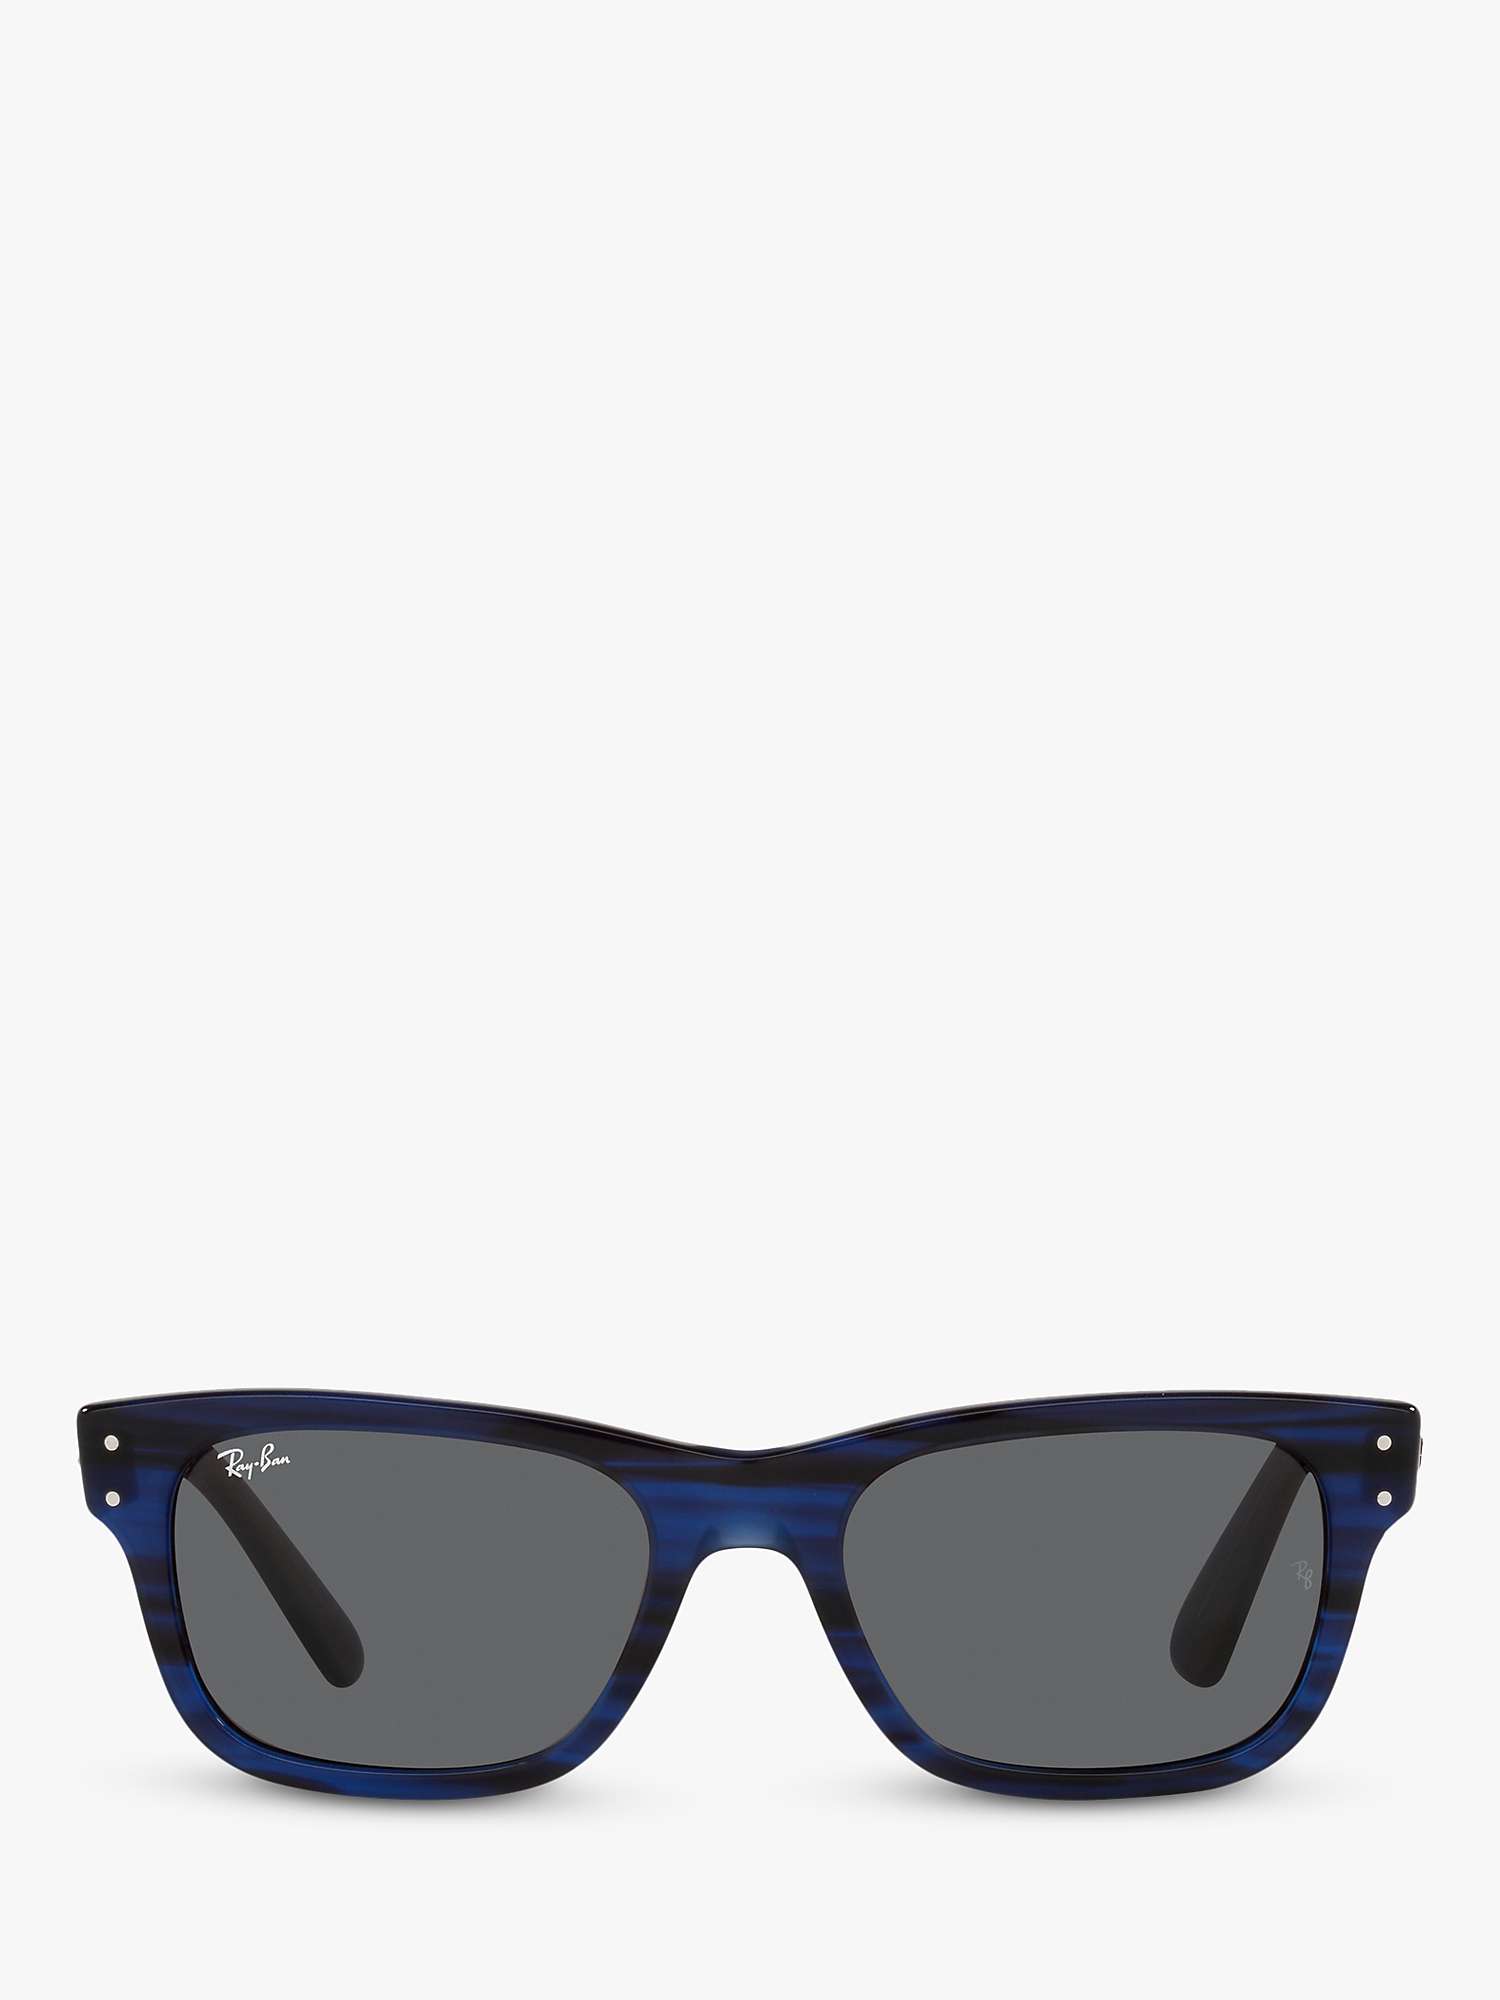 Buy Ray-Ban RB2283901 Men's Sunglasses, Striped Blue/Grey Online at johnlewis.com